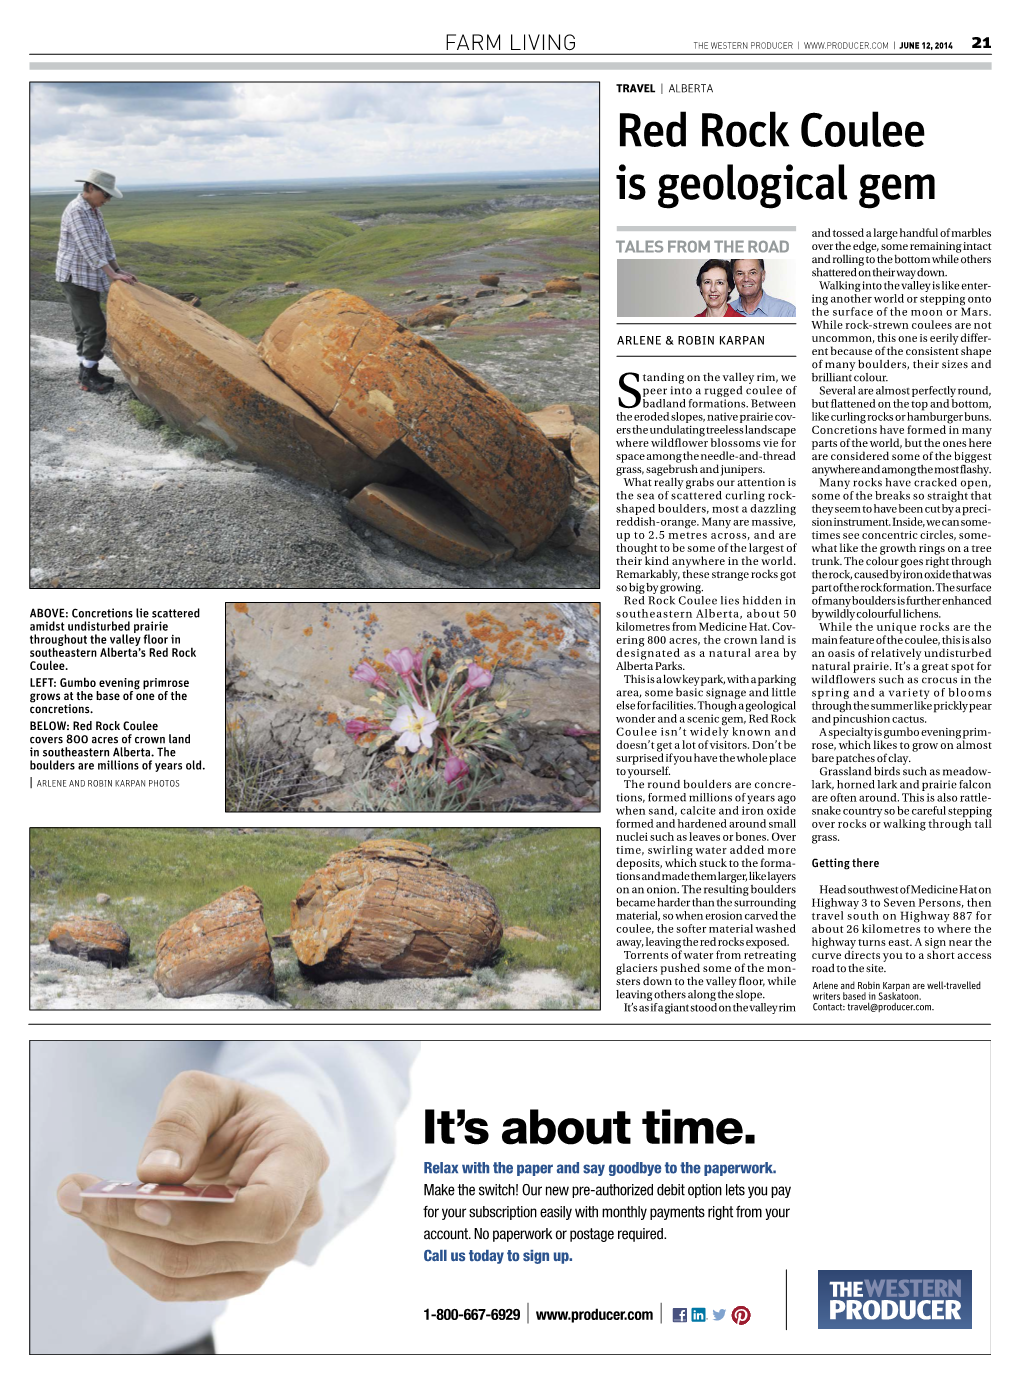 Red Rock Coulee Is Geological Gem It's About Time